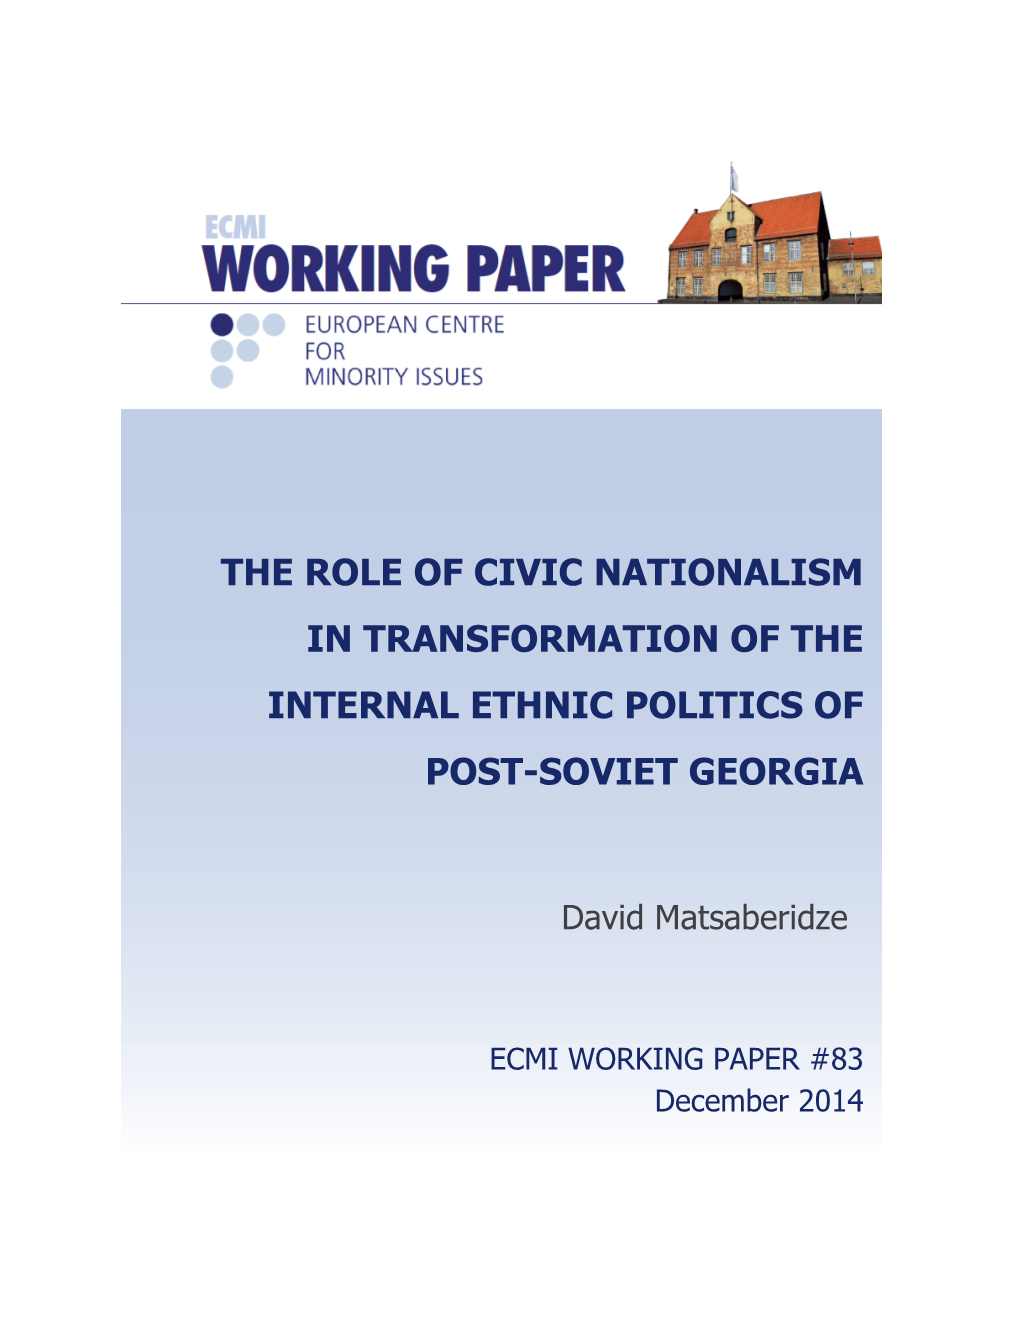 The Role of Civic Nationalism in Transformation of the Internal Ethnic Politics of Post-Soviet Georgia